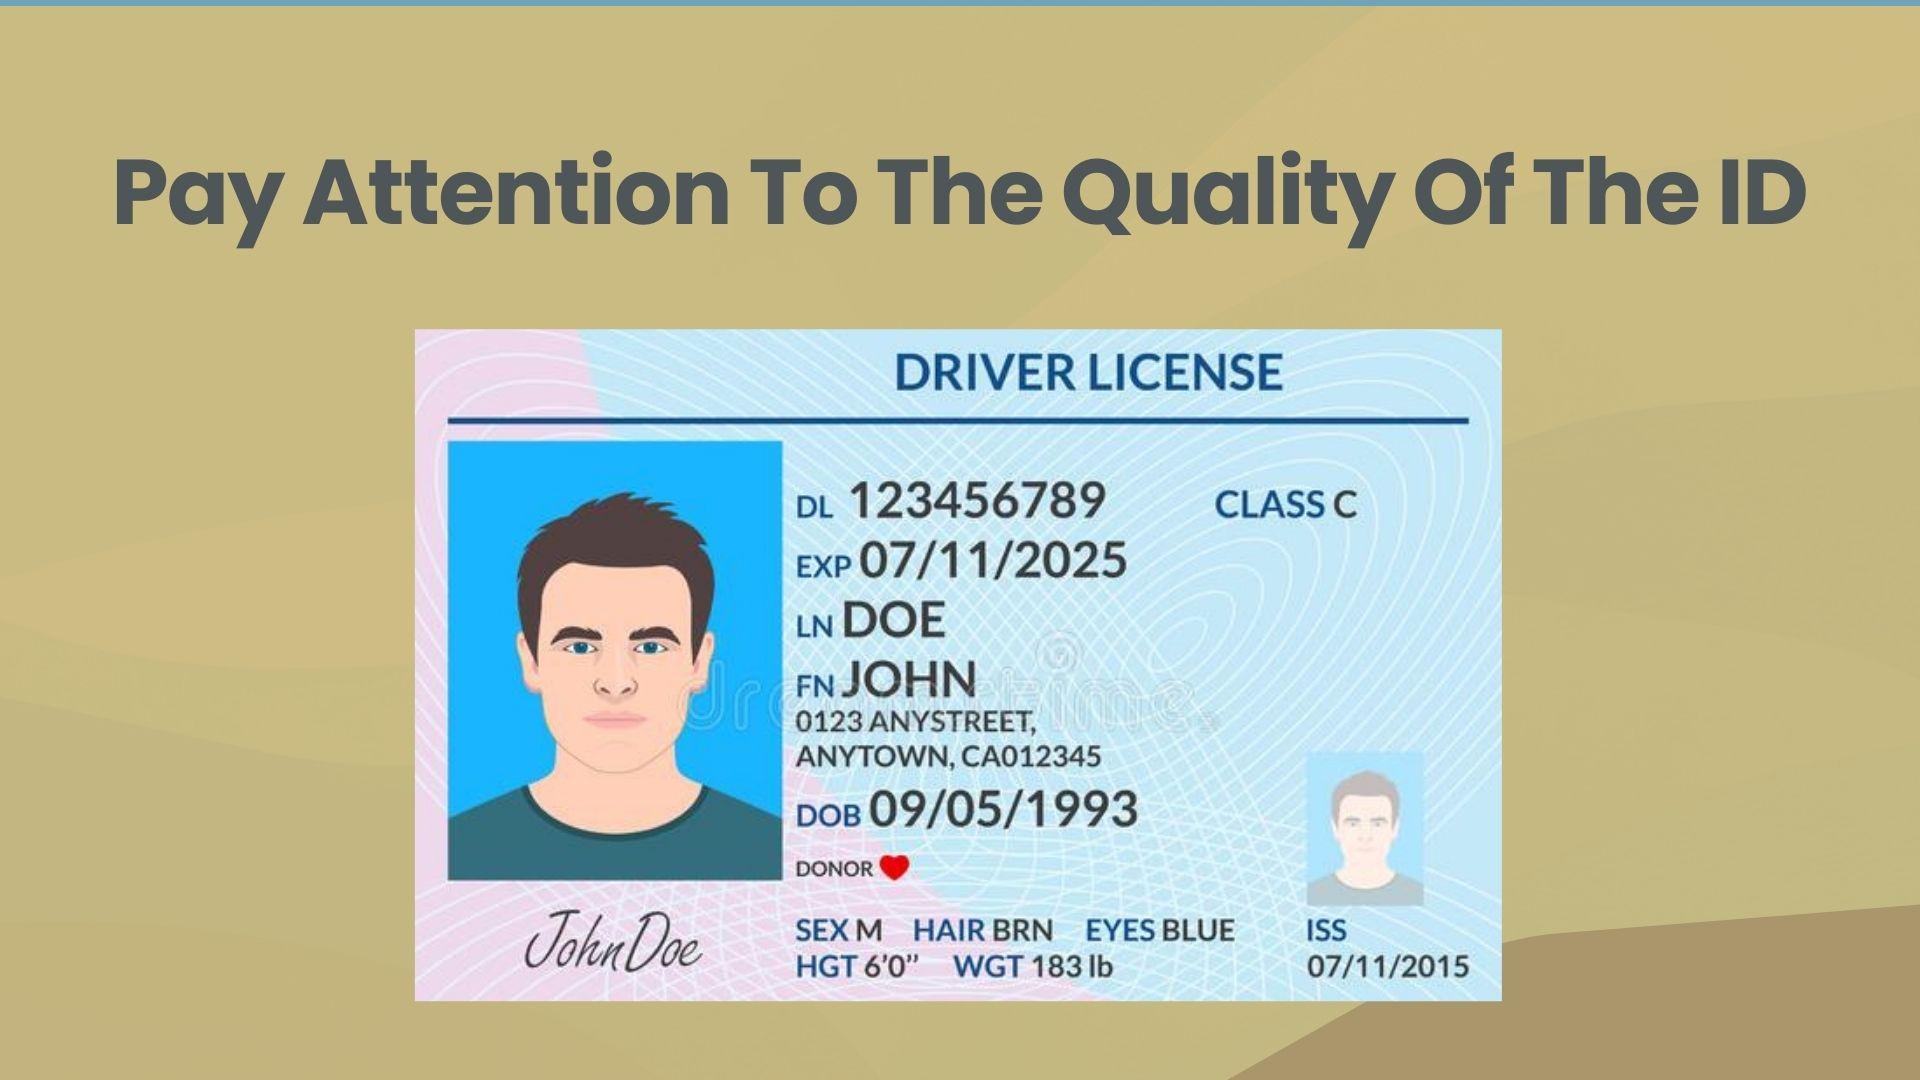 pay-attention-to-the-quality-of-the-id.jpg